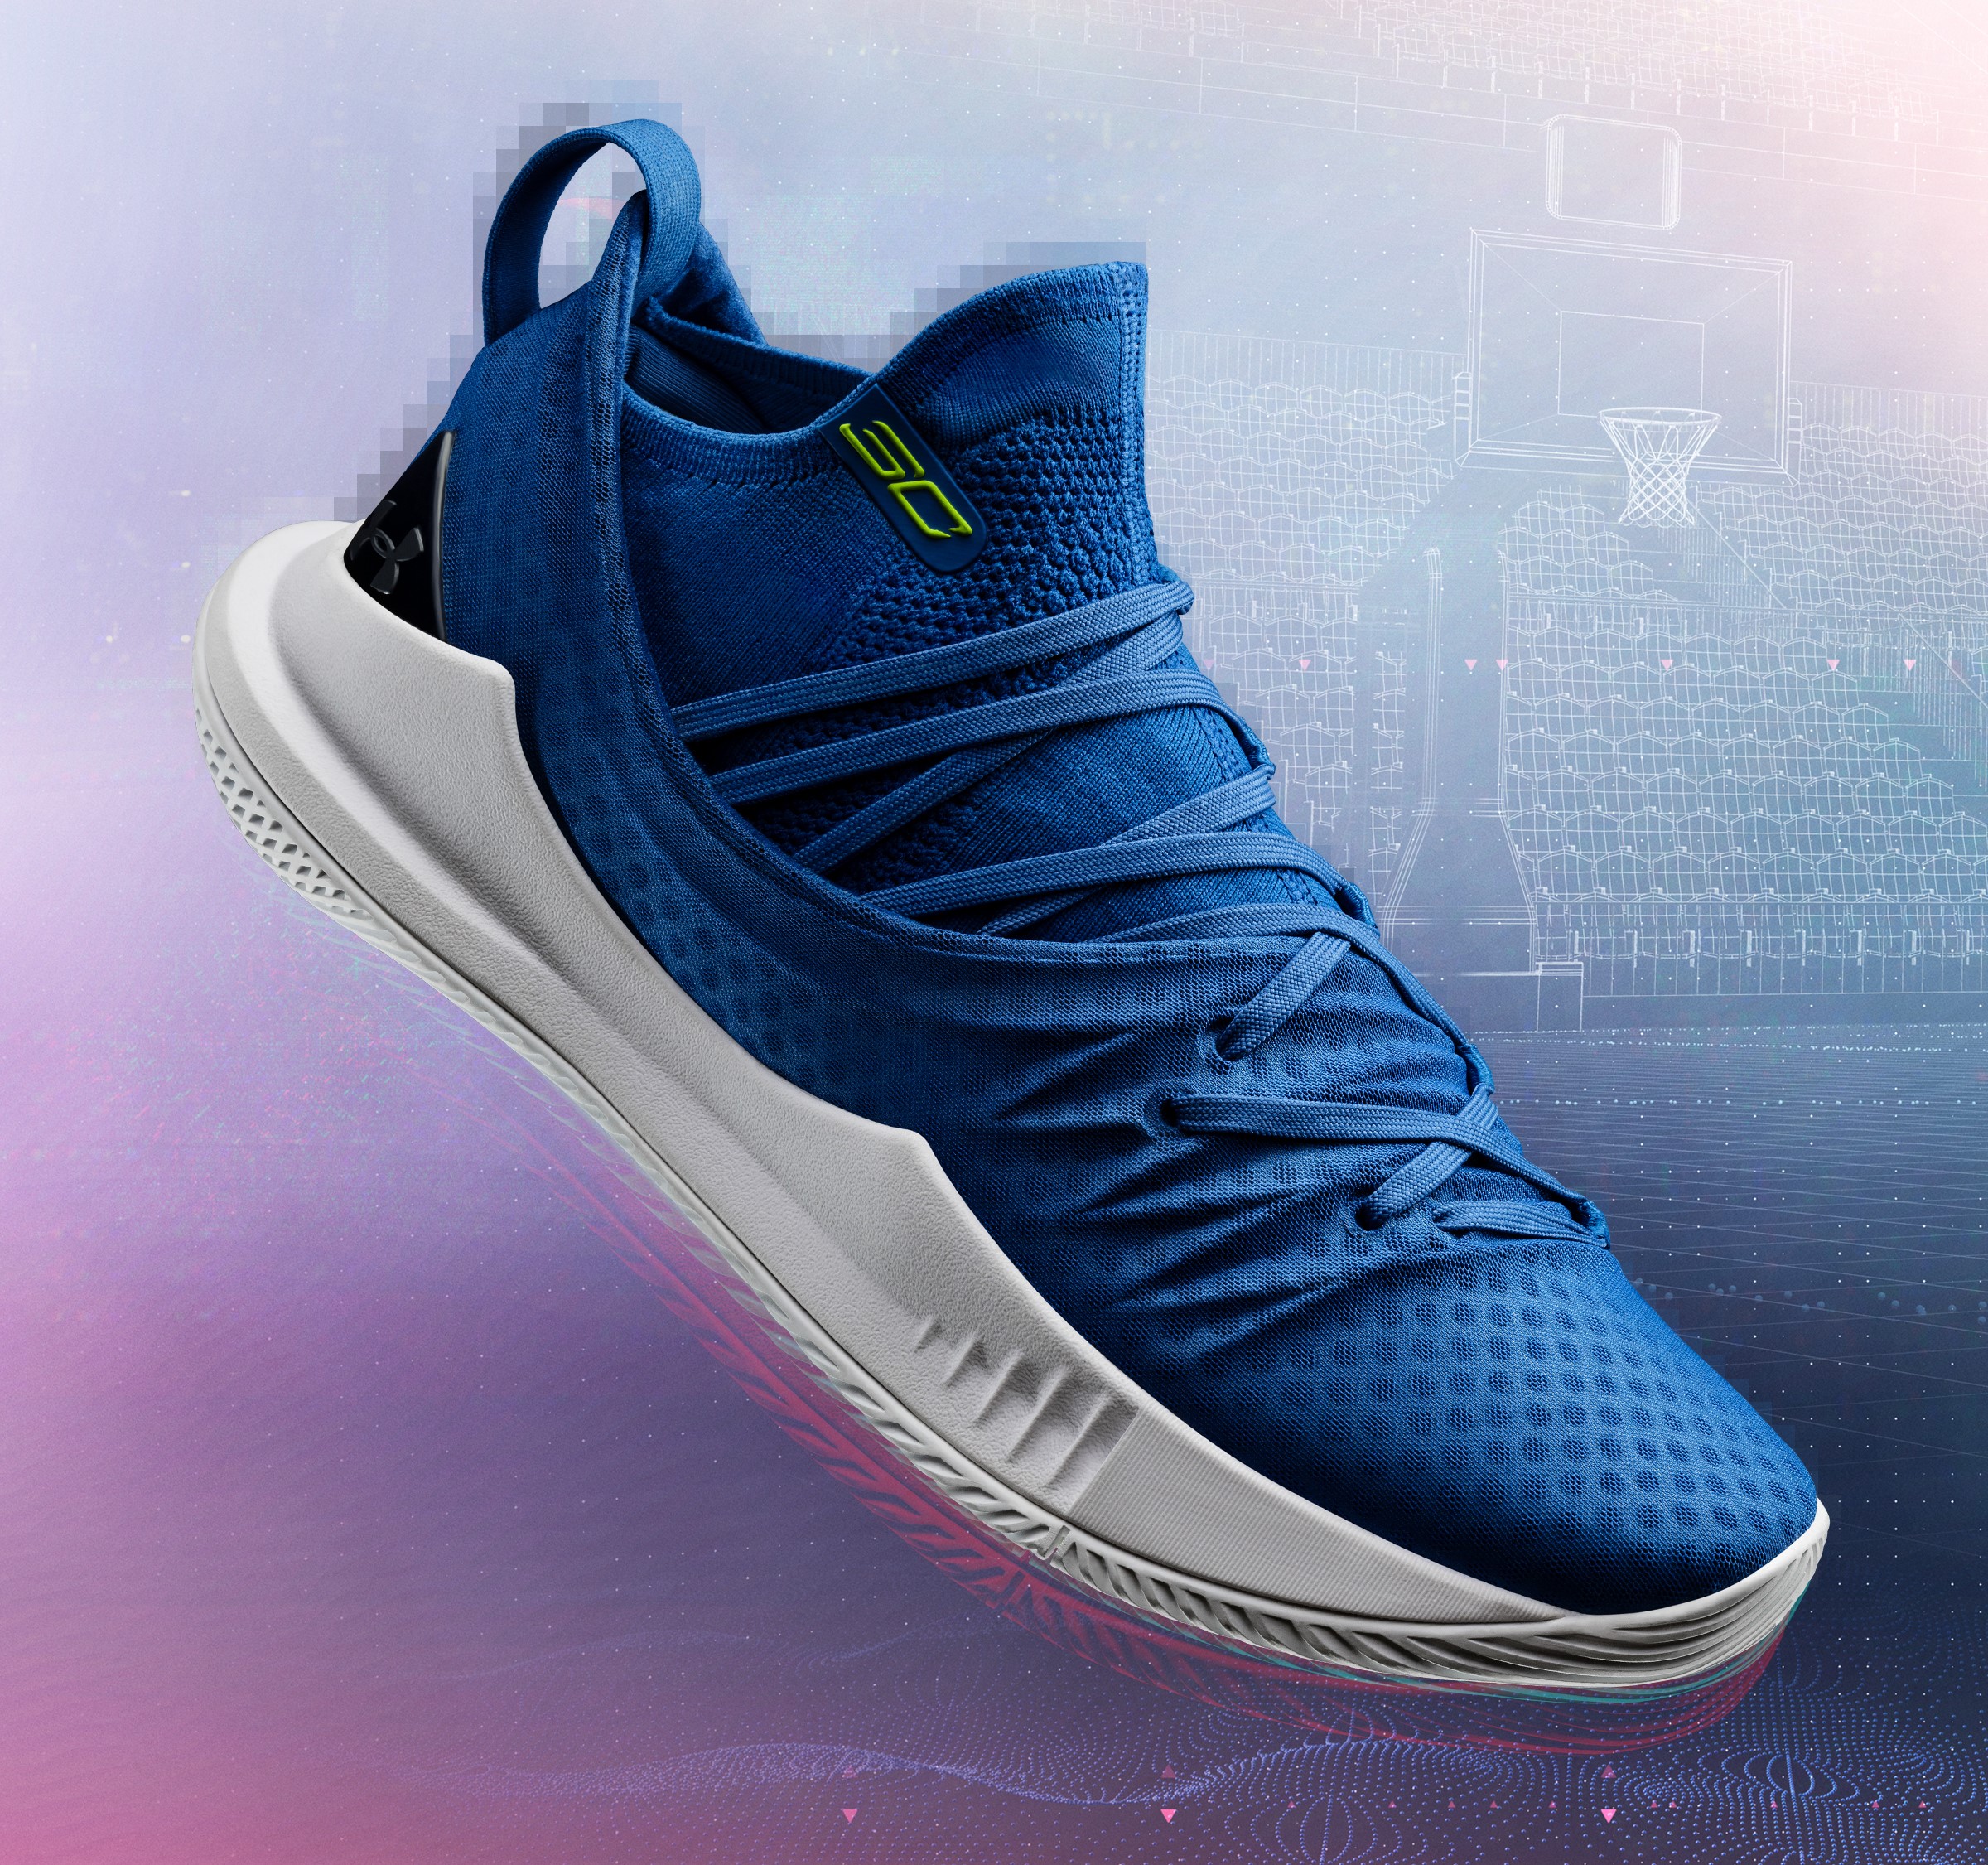 curry 5 finish line